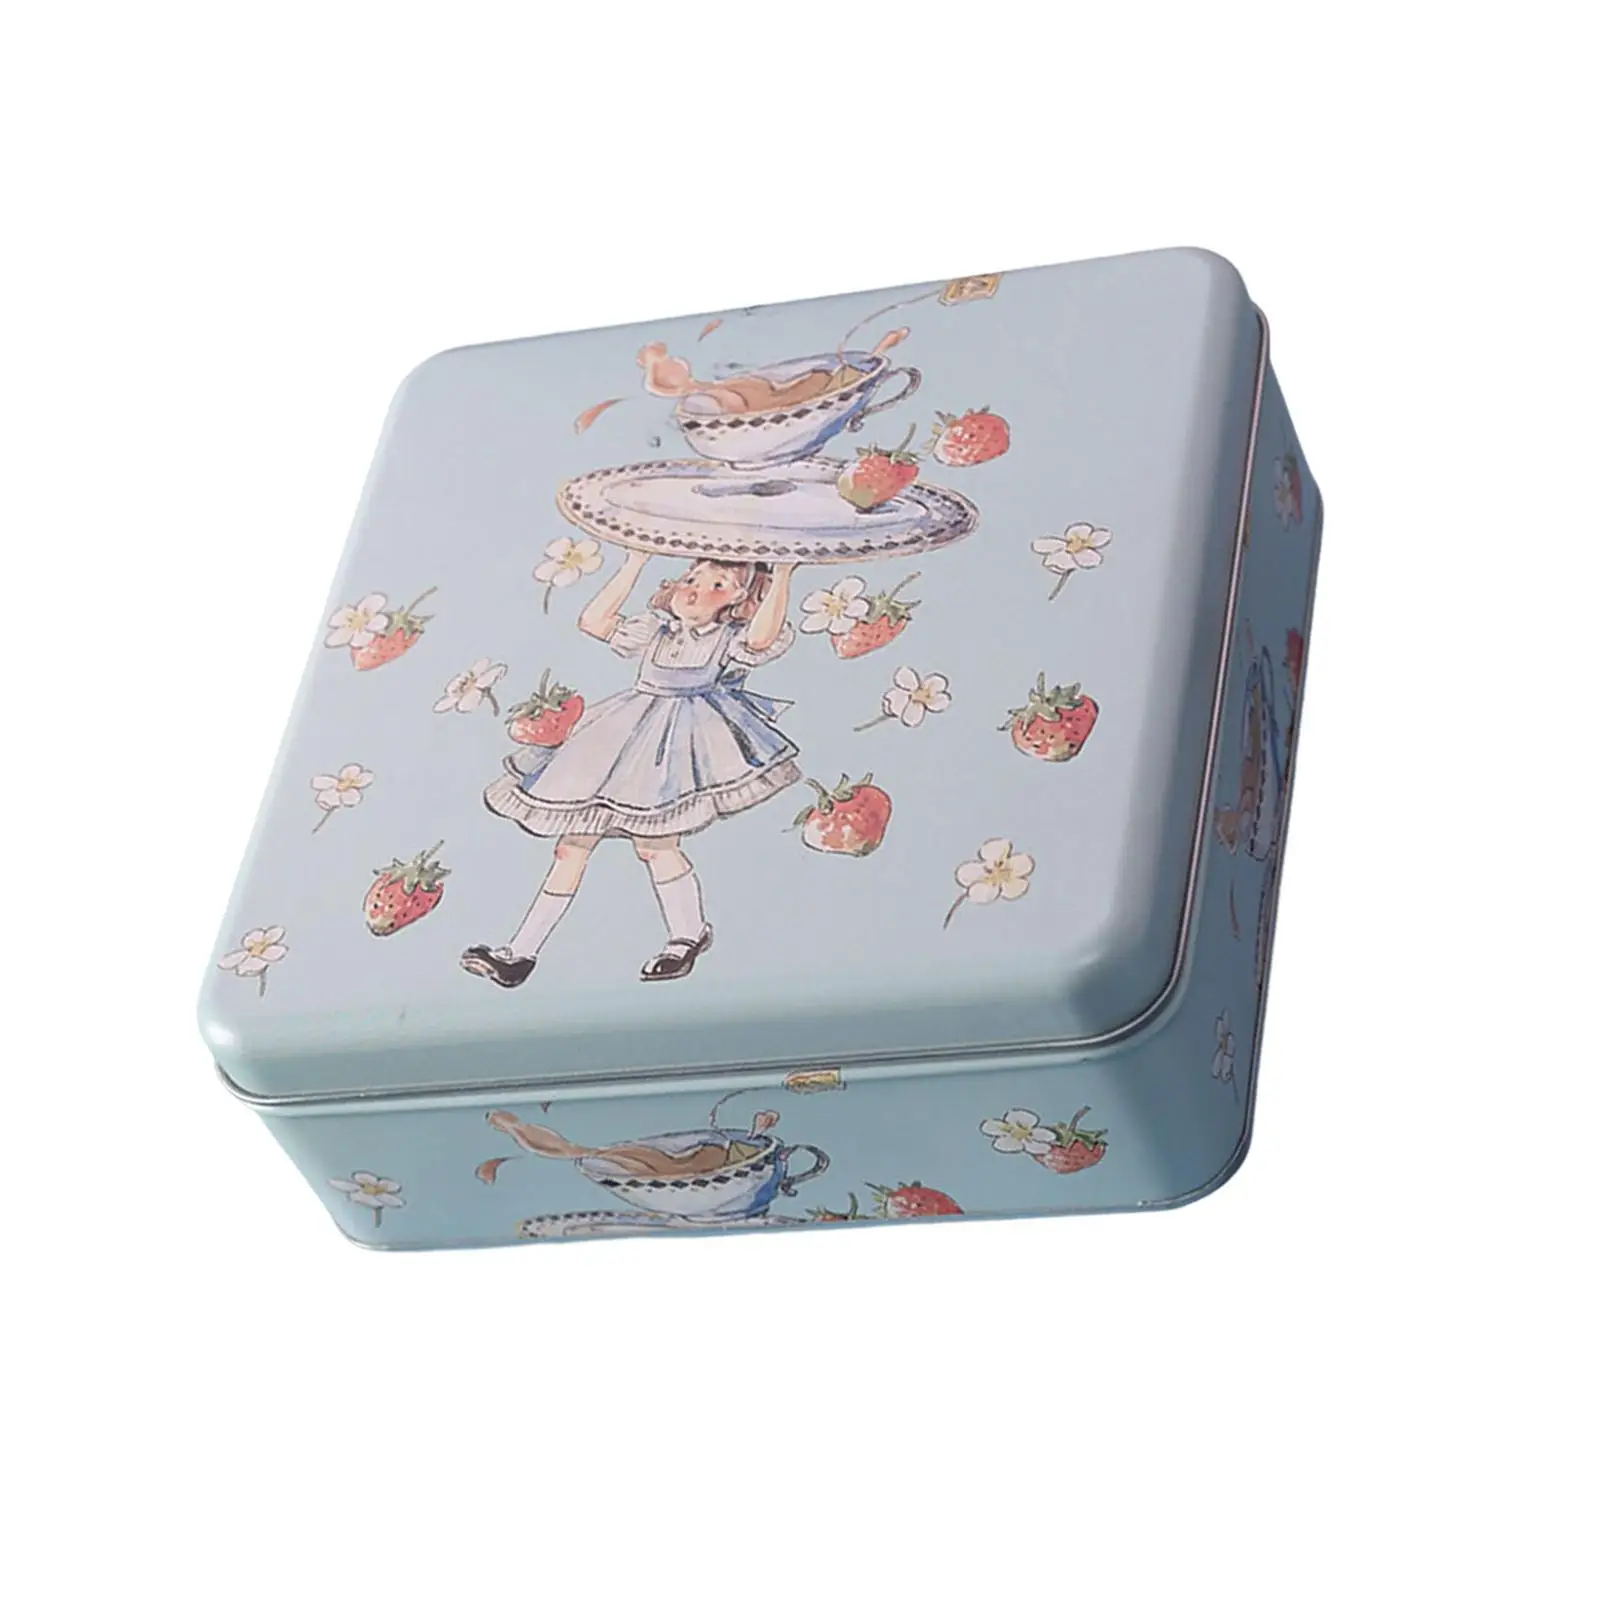 Iron Biscuit Storage Tin Candy Box Food Storage Containers Cookie Tin Box for Party